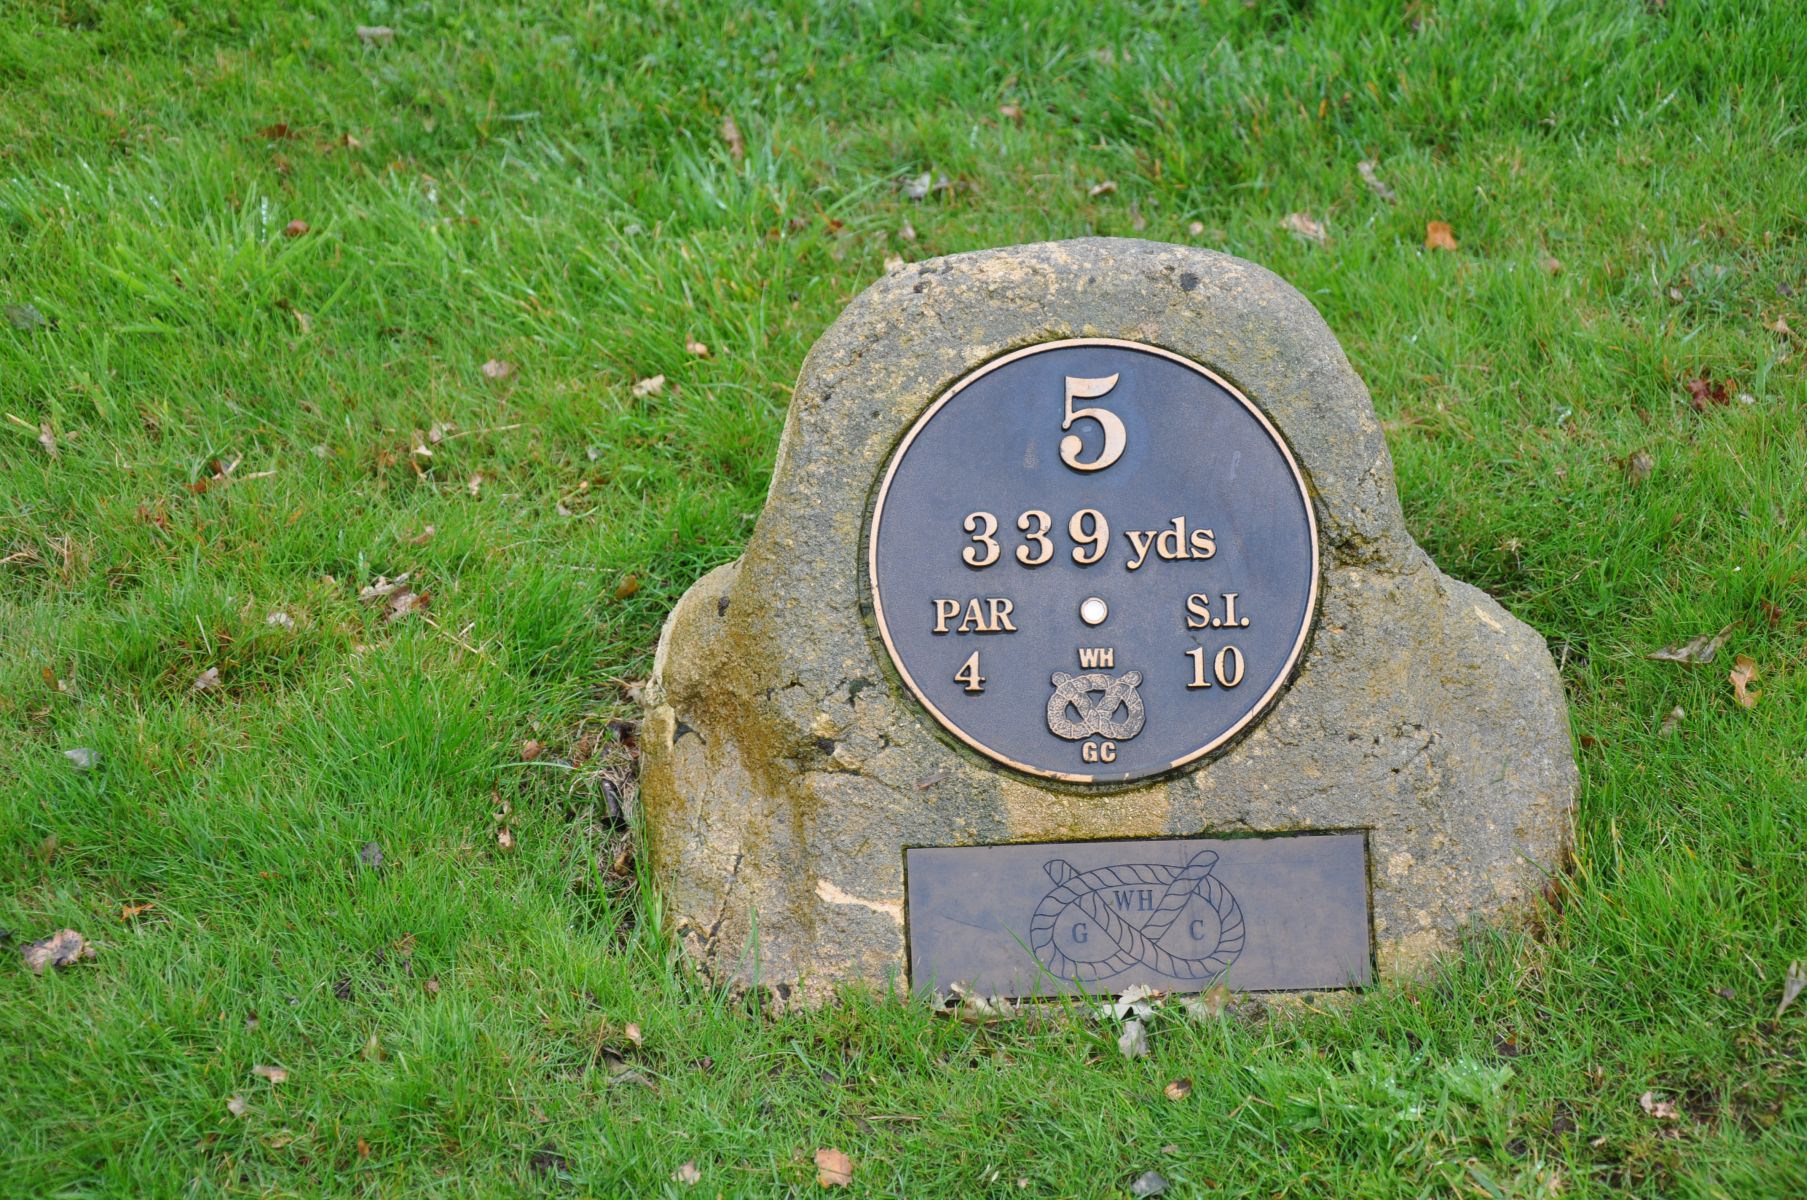 THE WHITE TEE MARKER FOR HOLE FIVE